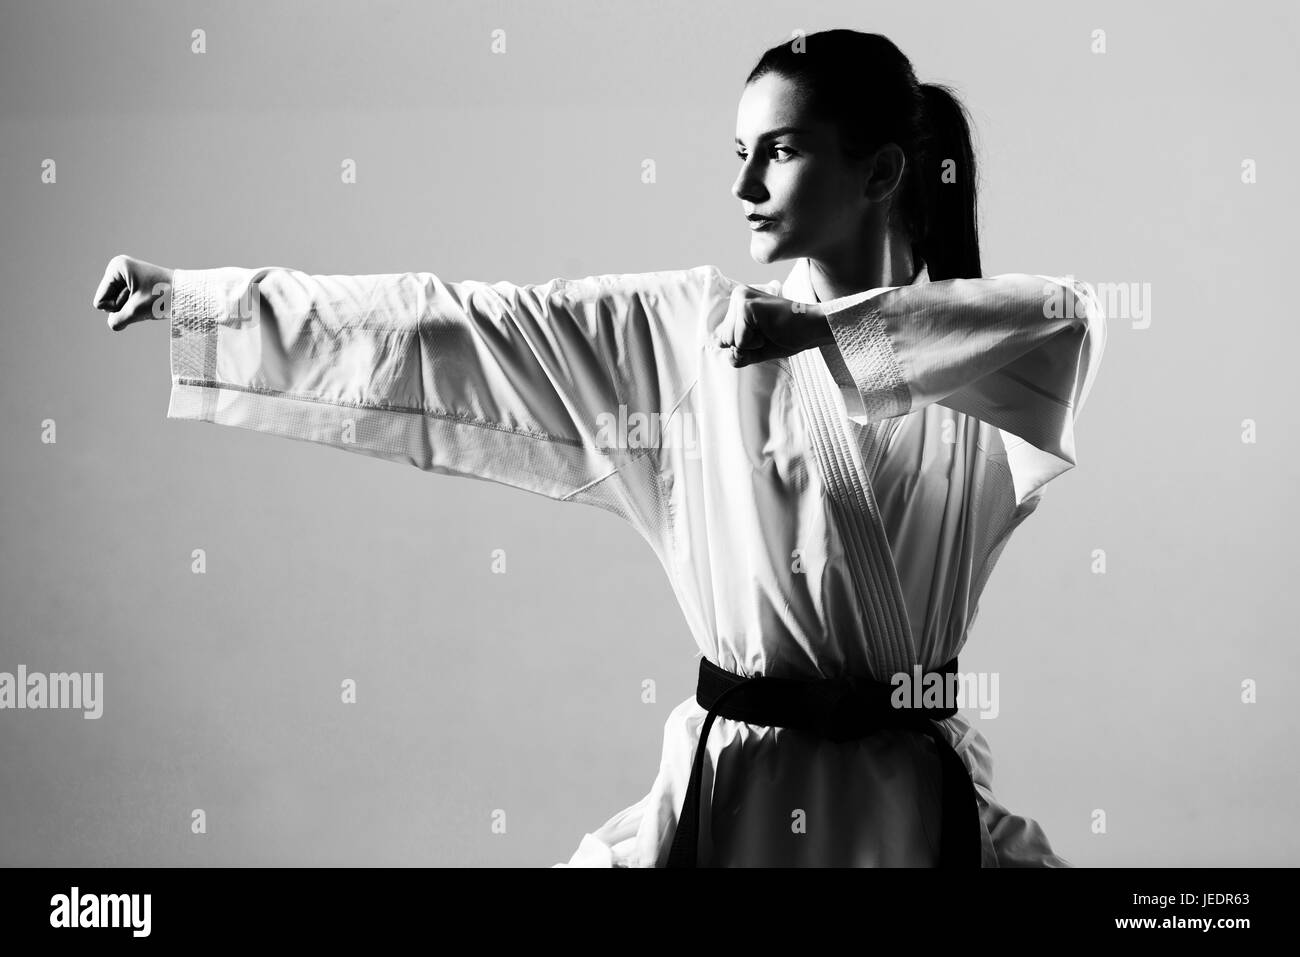 Young Woman Dressed In Traditional Kimono Practicing Her Karate Moves - Black Belt Stock Photo